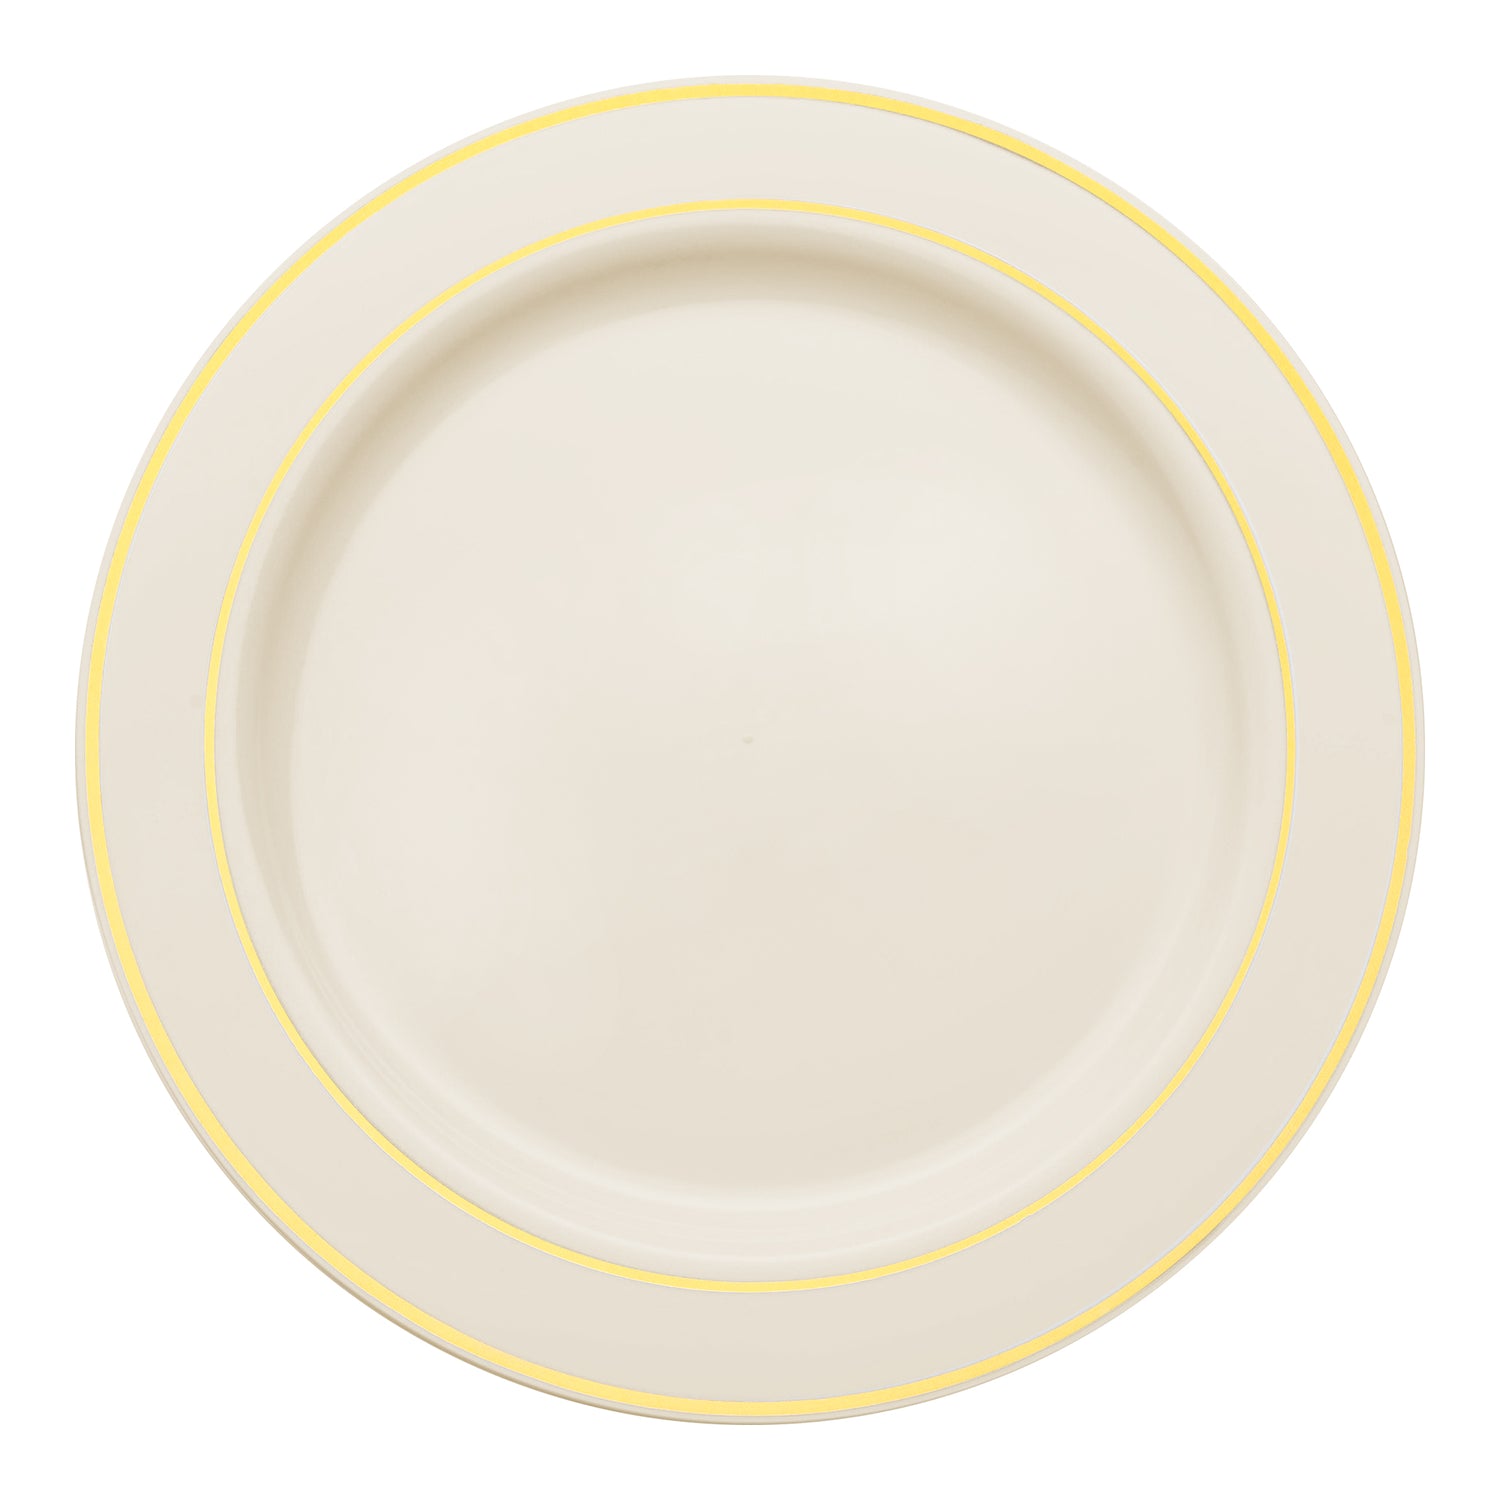 Ivory with Gold Edge Rim Plastic Dinner Plates (10.25") | The Kaya Collection